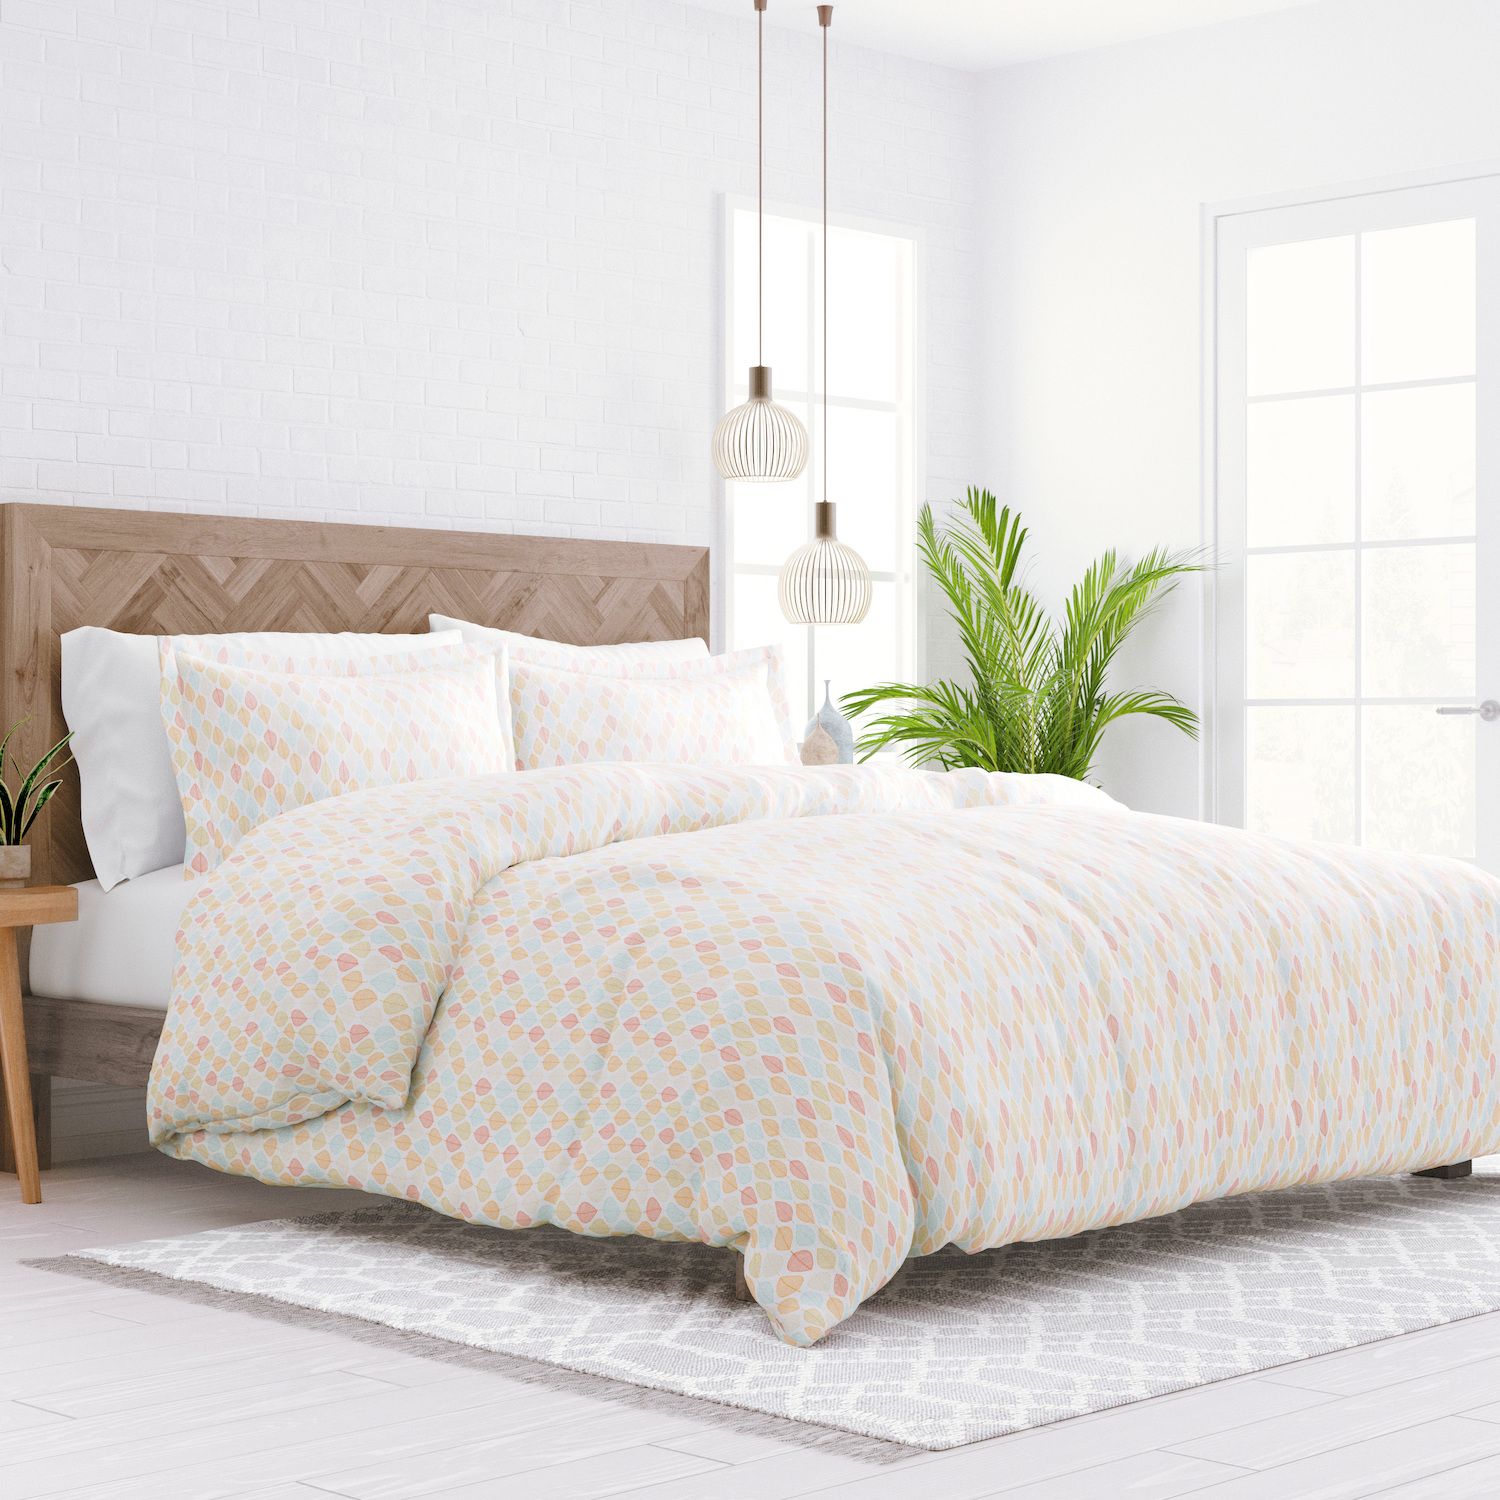 Image for Home Collection Premium Ultra Soft Fall Foliage Pattern Duvet Cover Set at Kohl's.